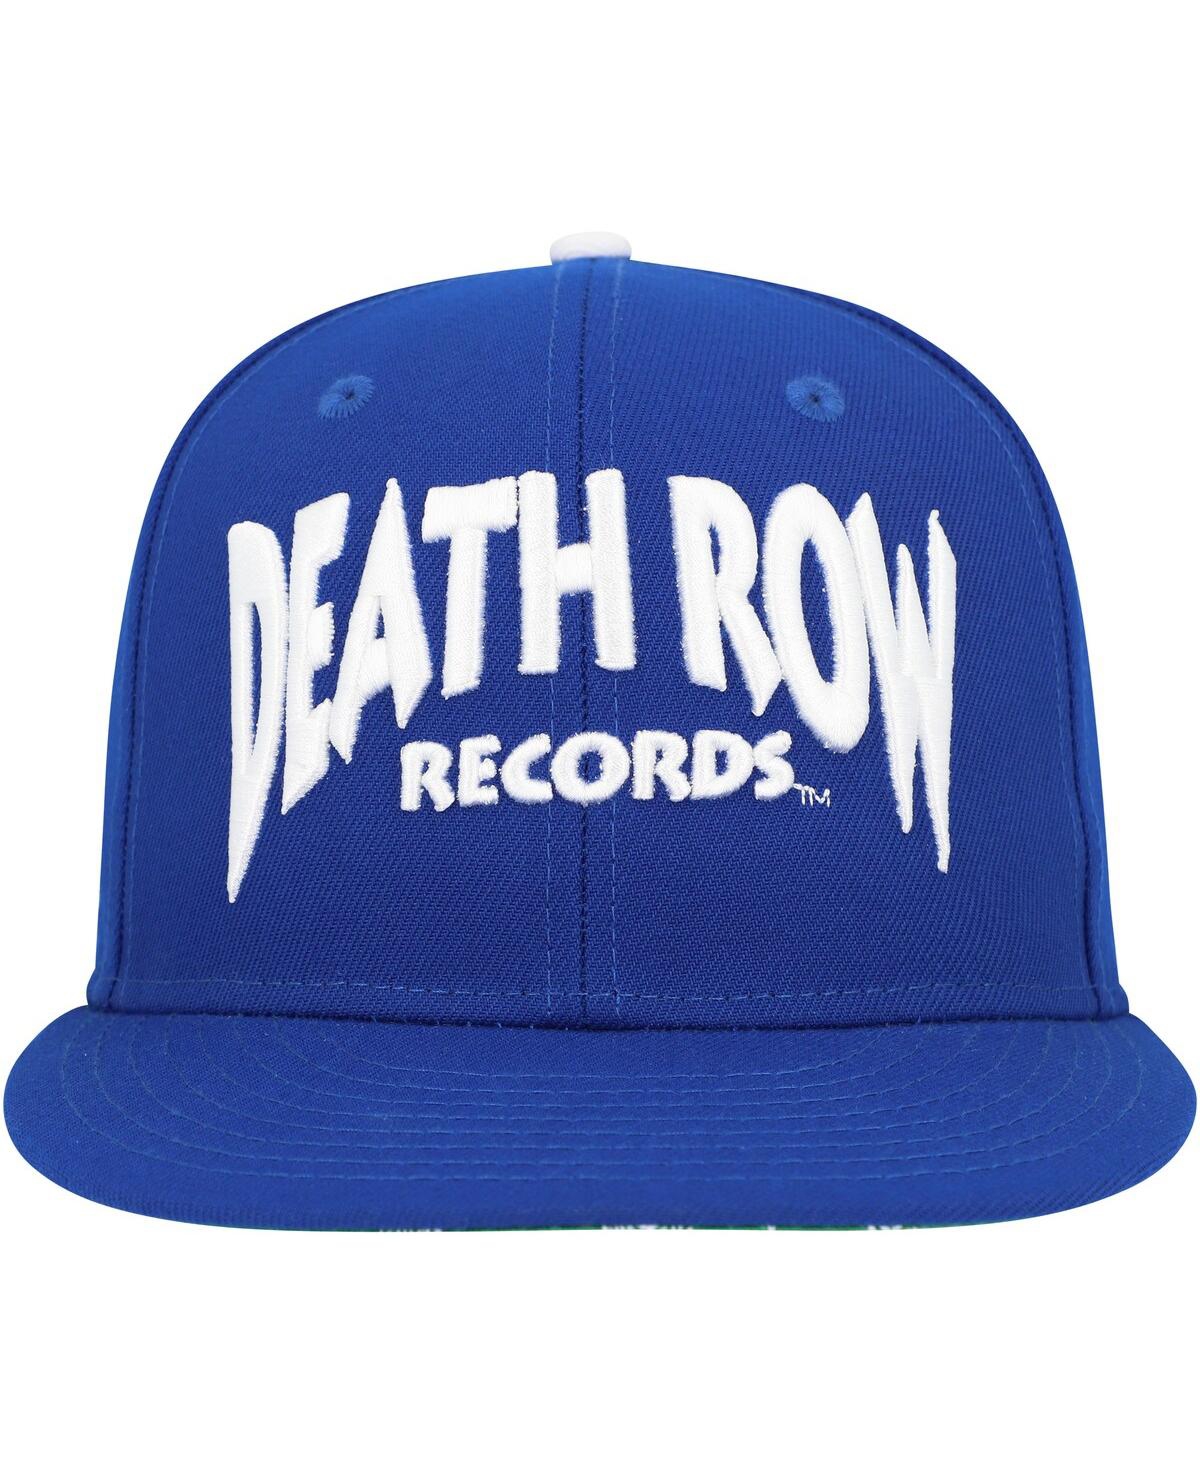 Shop Lids Men's Royal Death Row Records Paisley Fitted Hat